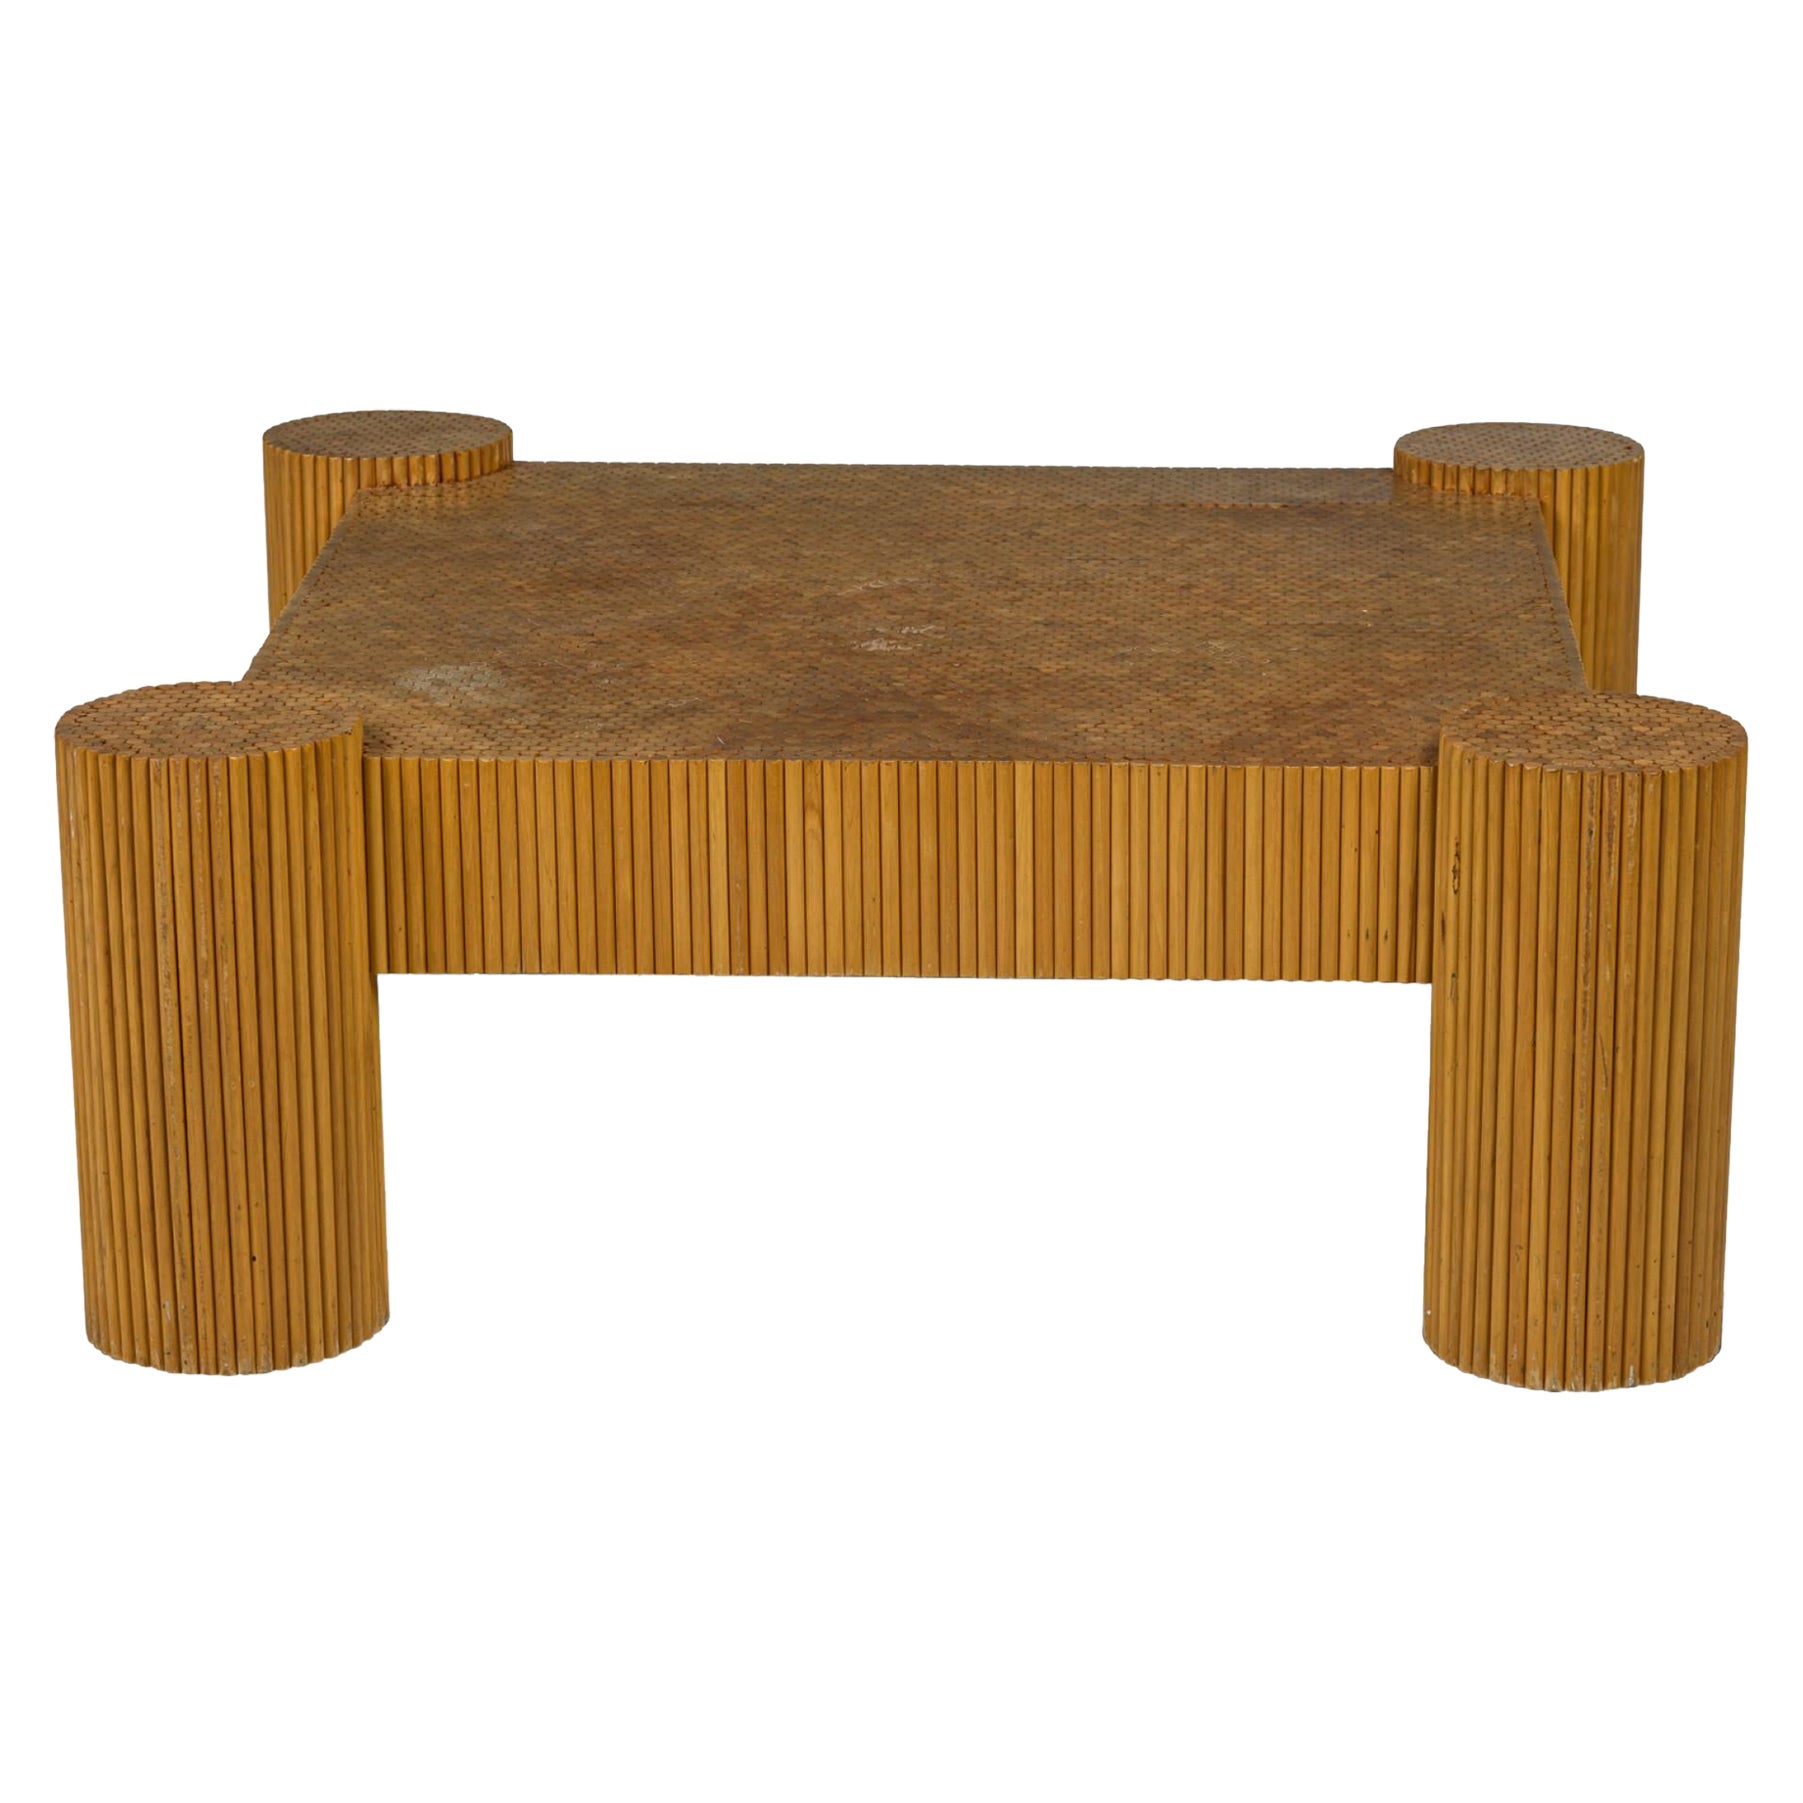 Ernest C. Masi American Mid-Century Bamboo Coffee Table For Sale